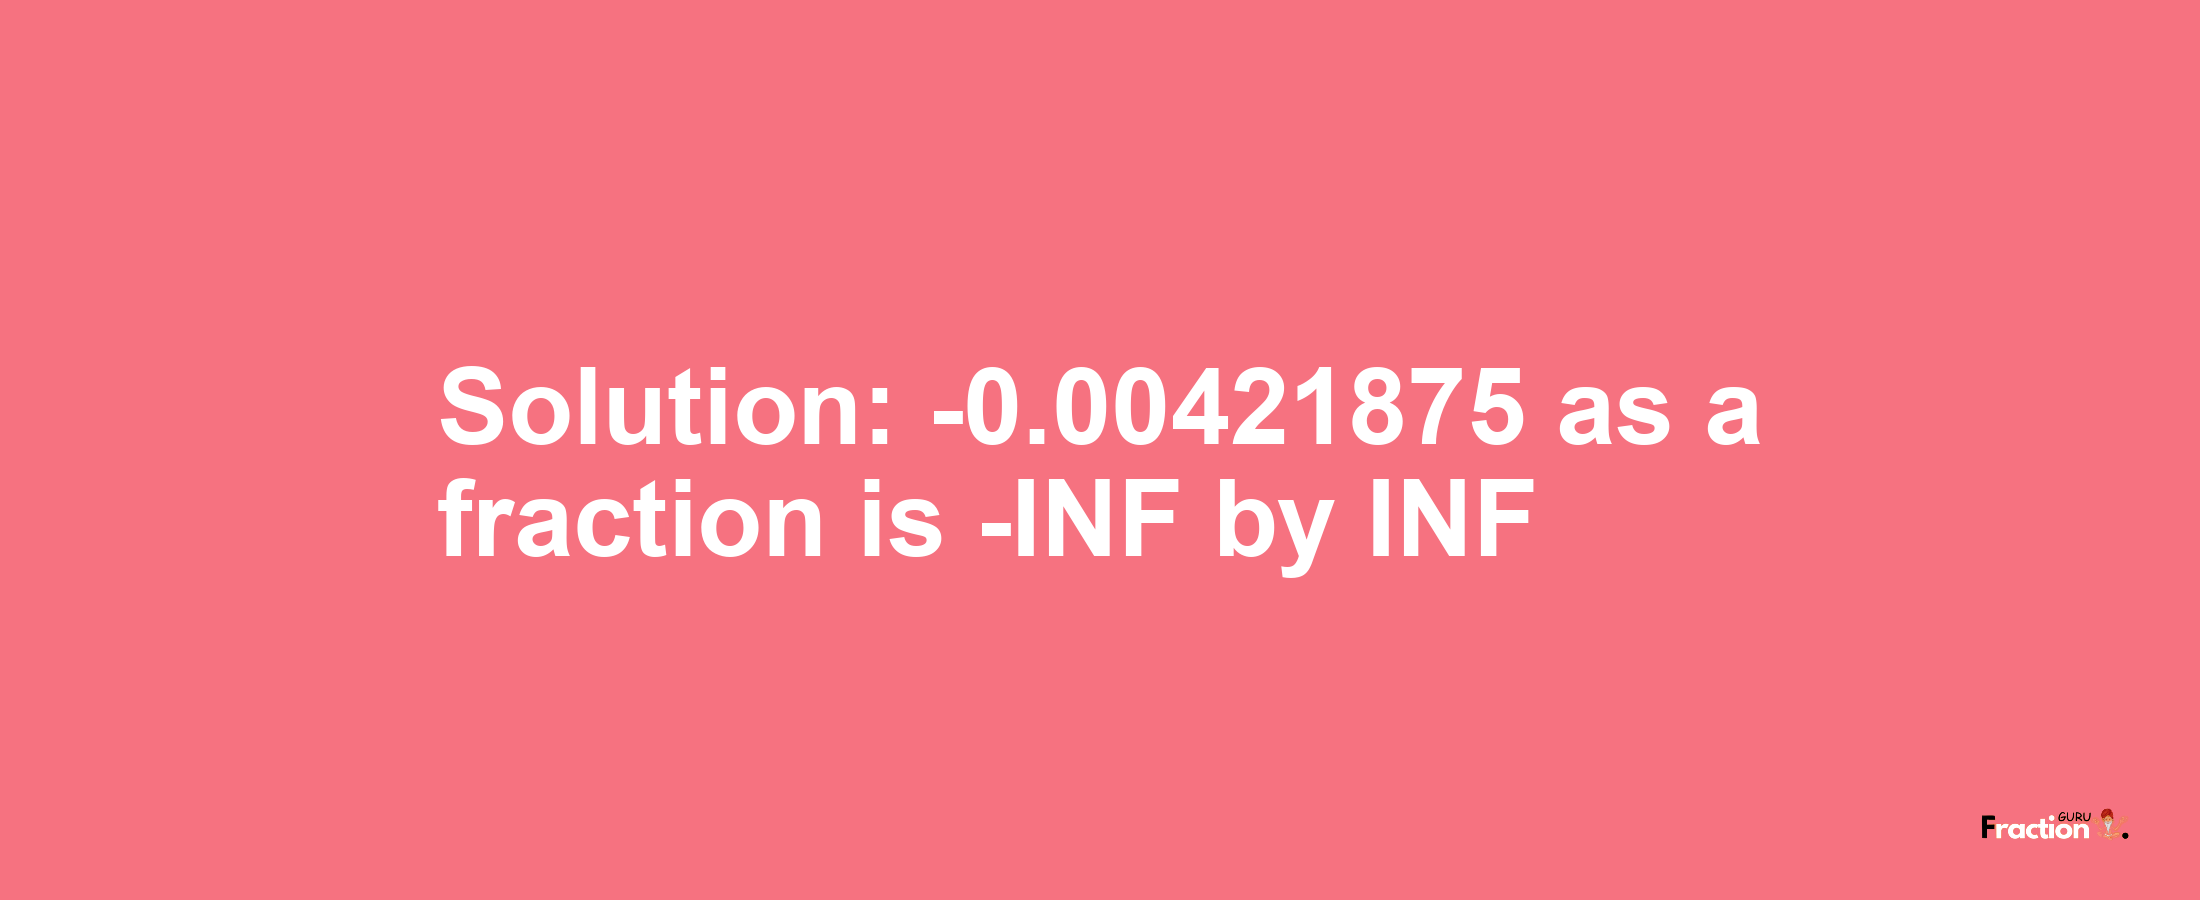 Solution:-0.00421875 as a fraction is -INF/INF